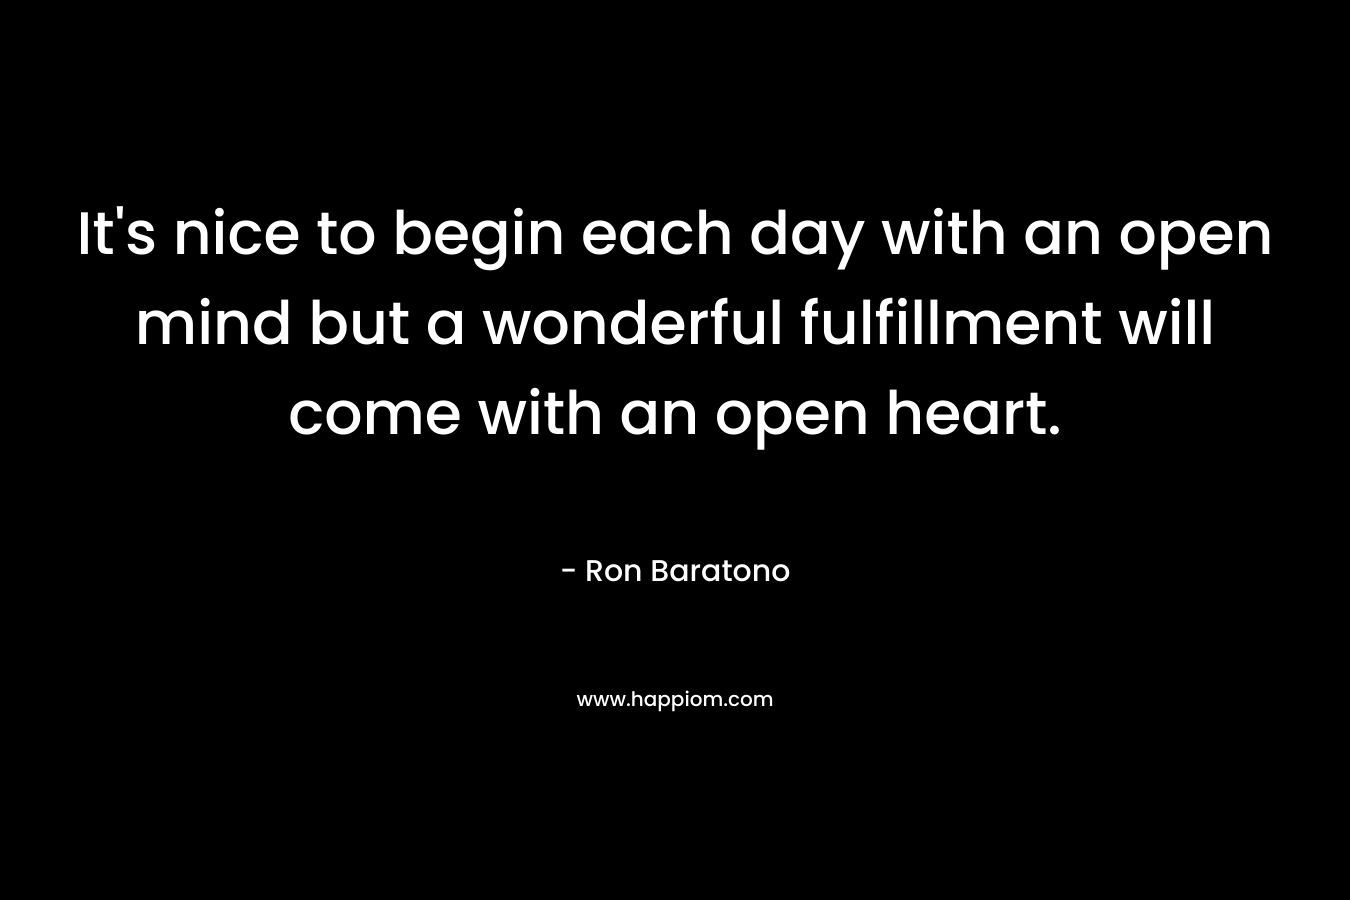 It’s nice to begin each day with an open mind but a wonderful fulfillment will come with an open heart. – Ron Baratono